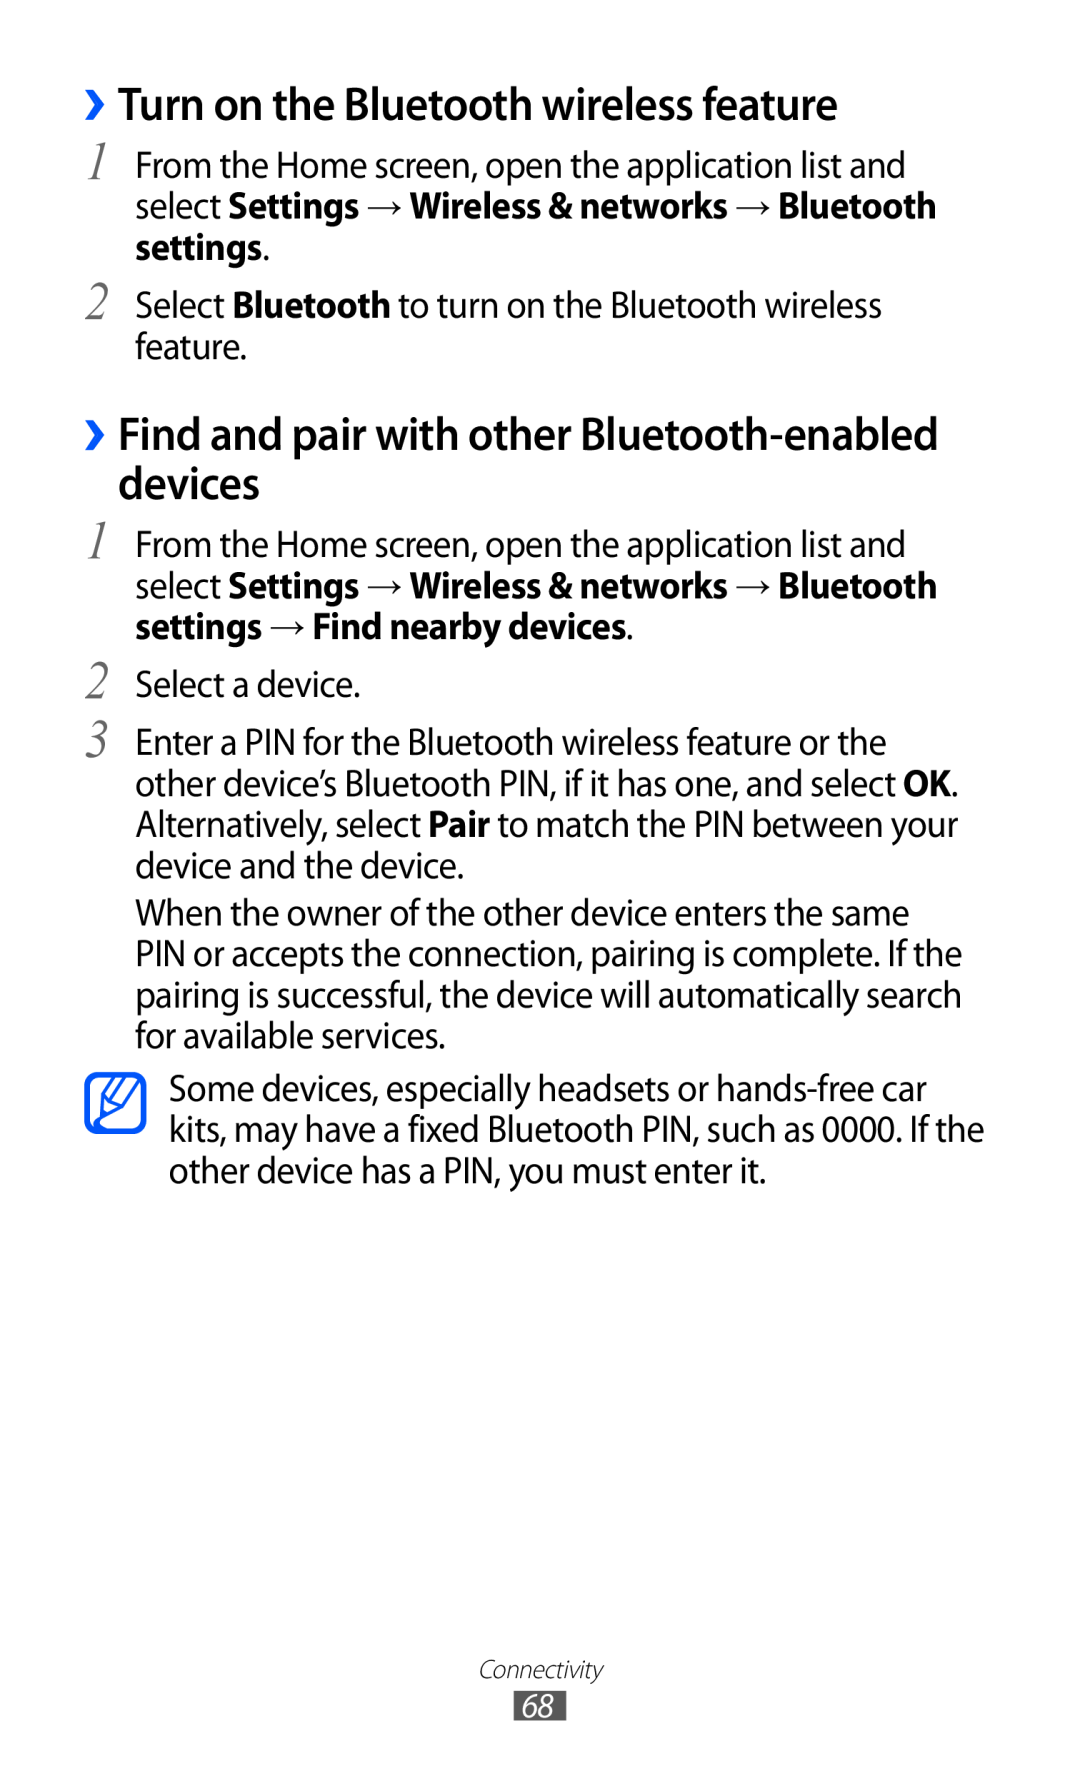 Samsung GT-P7510 user manual ››Turn on the Bluetooth wireless feature, ››Find and pair with other Bluetooth-enabled devices 